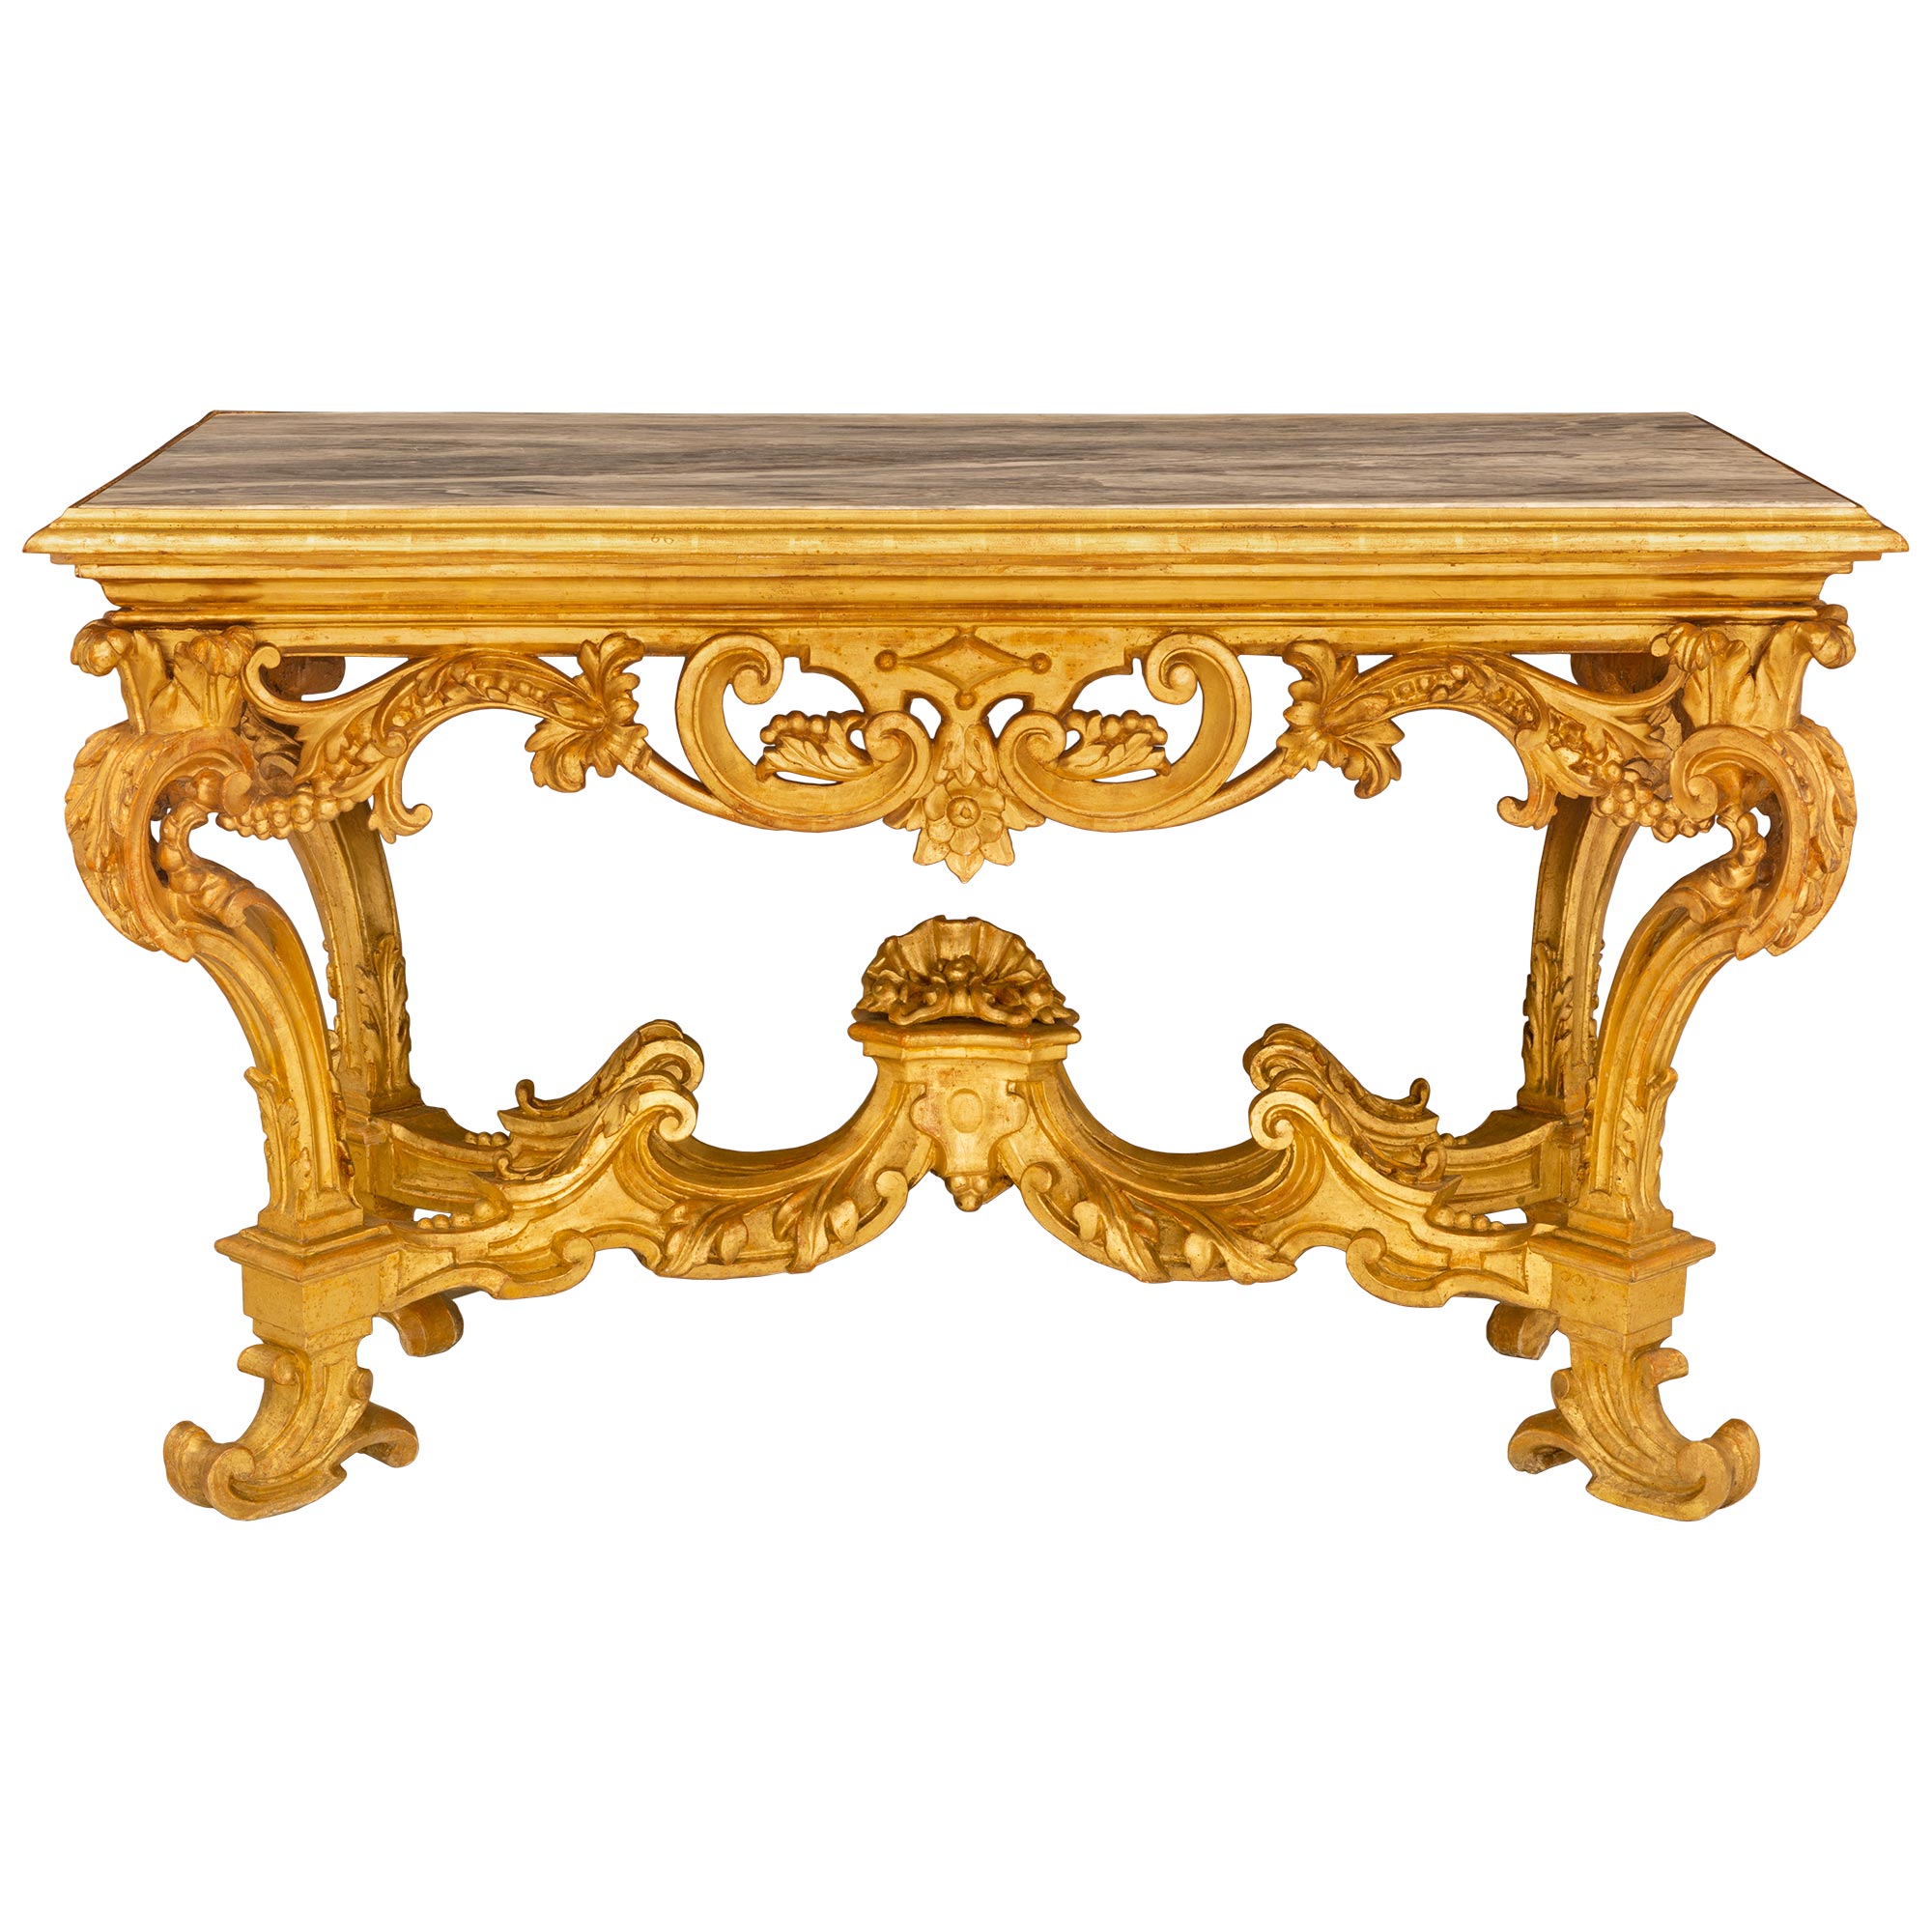 Italian Early 18th Century Louis XIV Period Giltwood and Marble Console For Sale